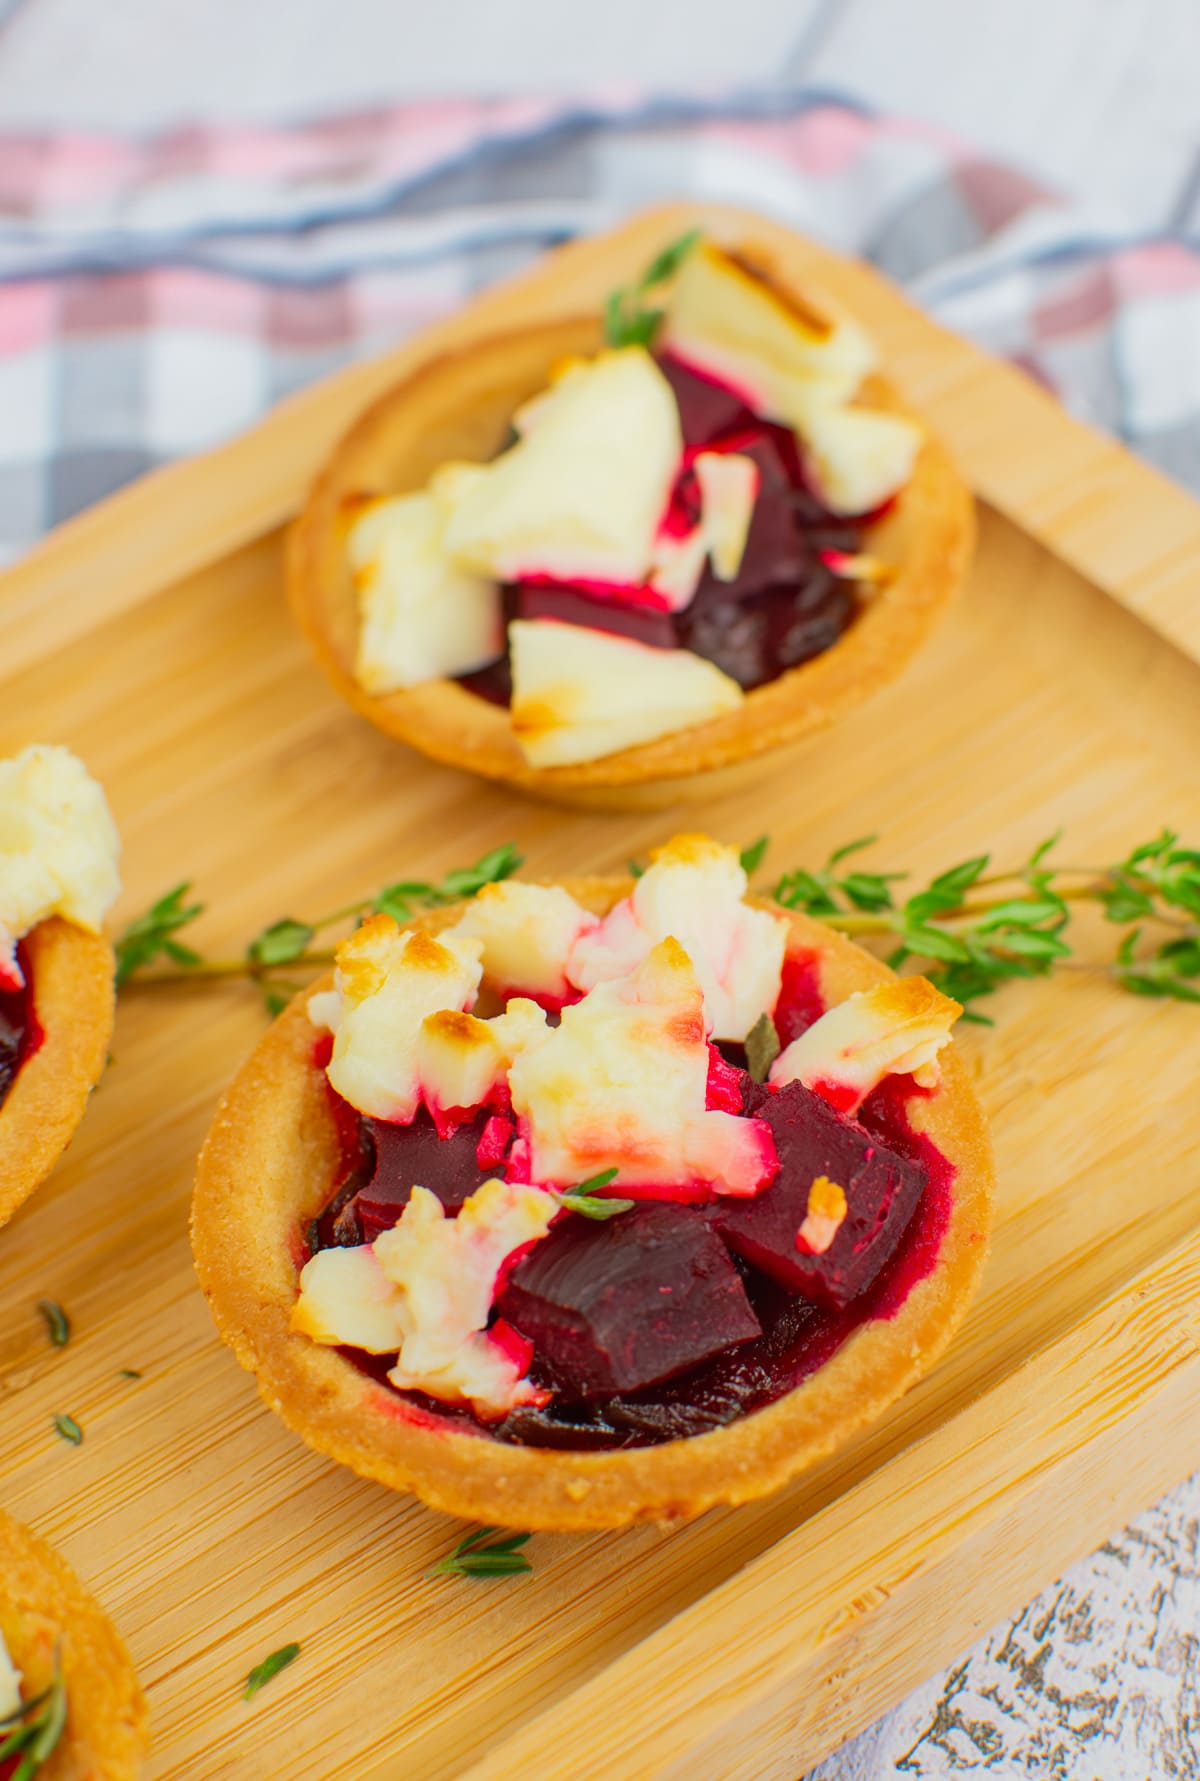 Baked beetroot and feta tartlets with a thyme brunch in the background served on a wooden board.